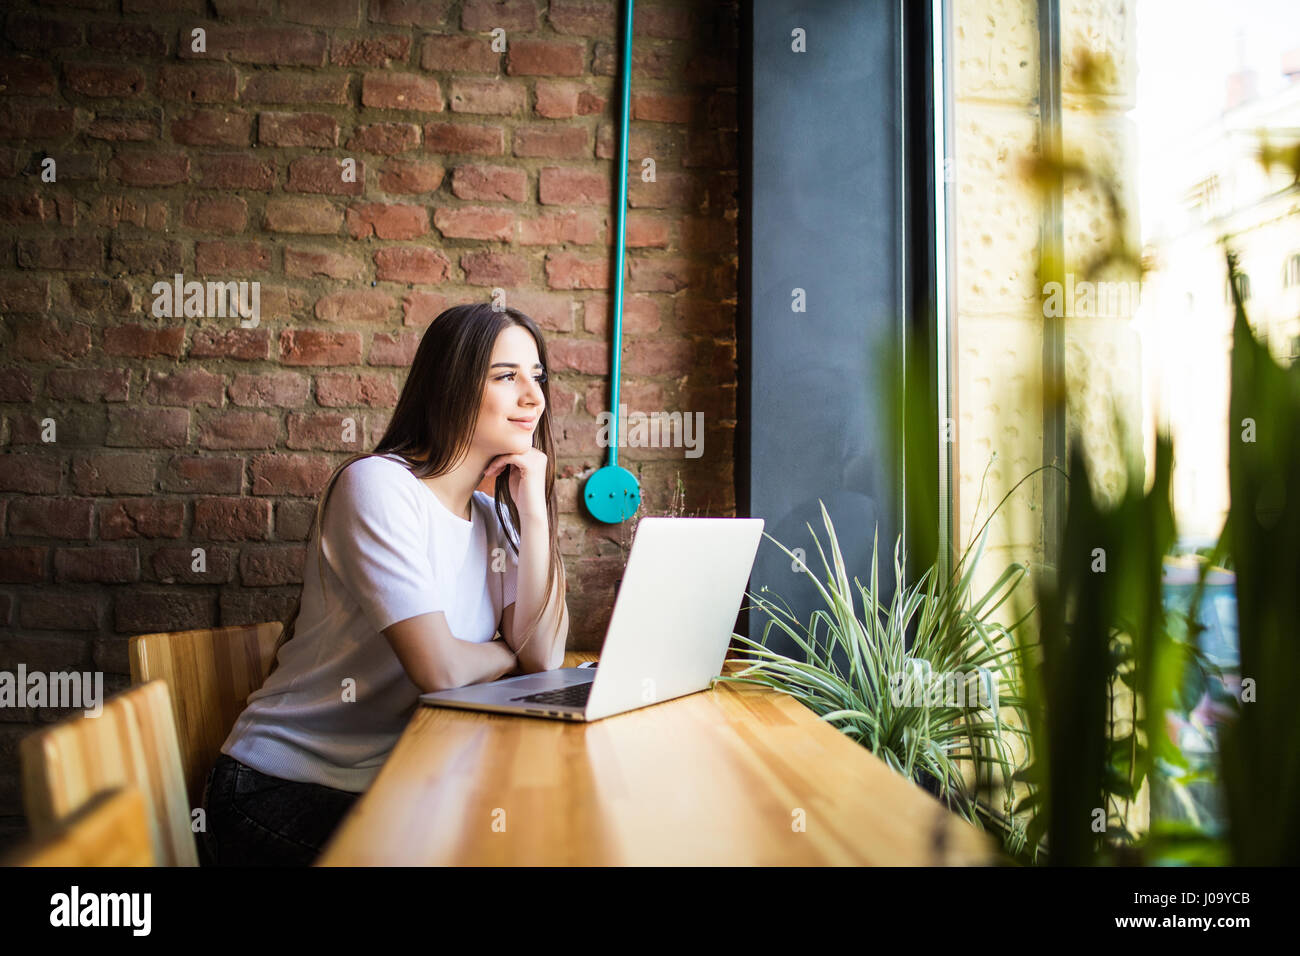 Side view of a young woman using laptop in cafe Stock Photo